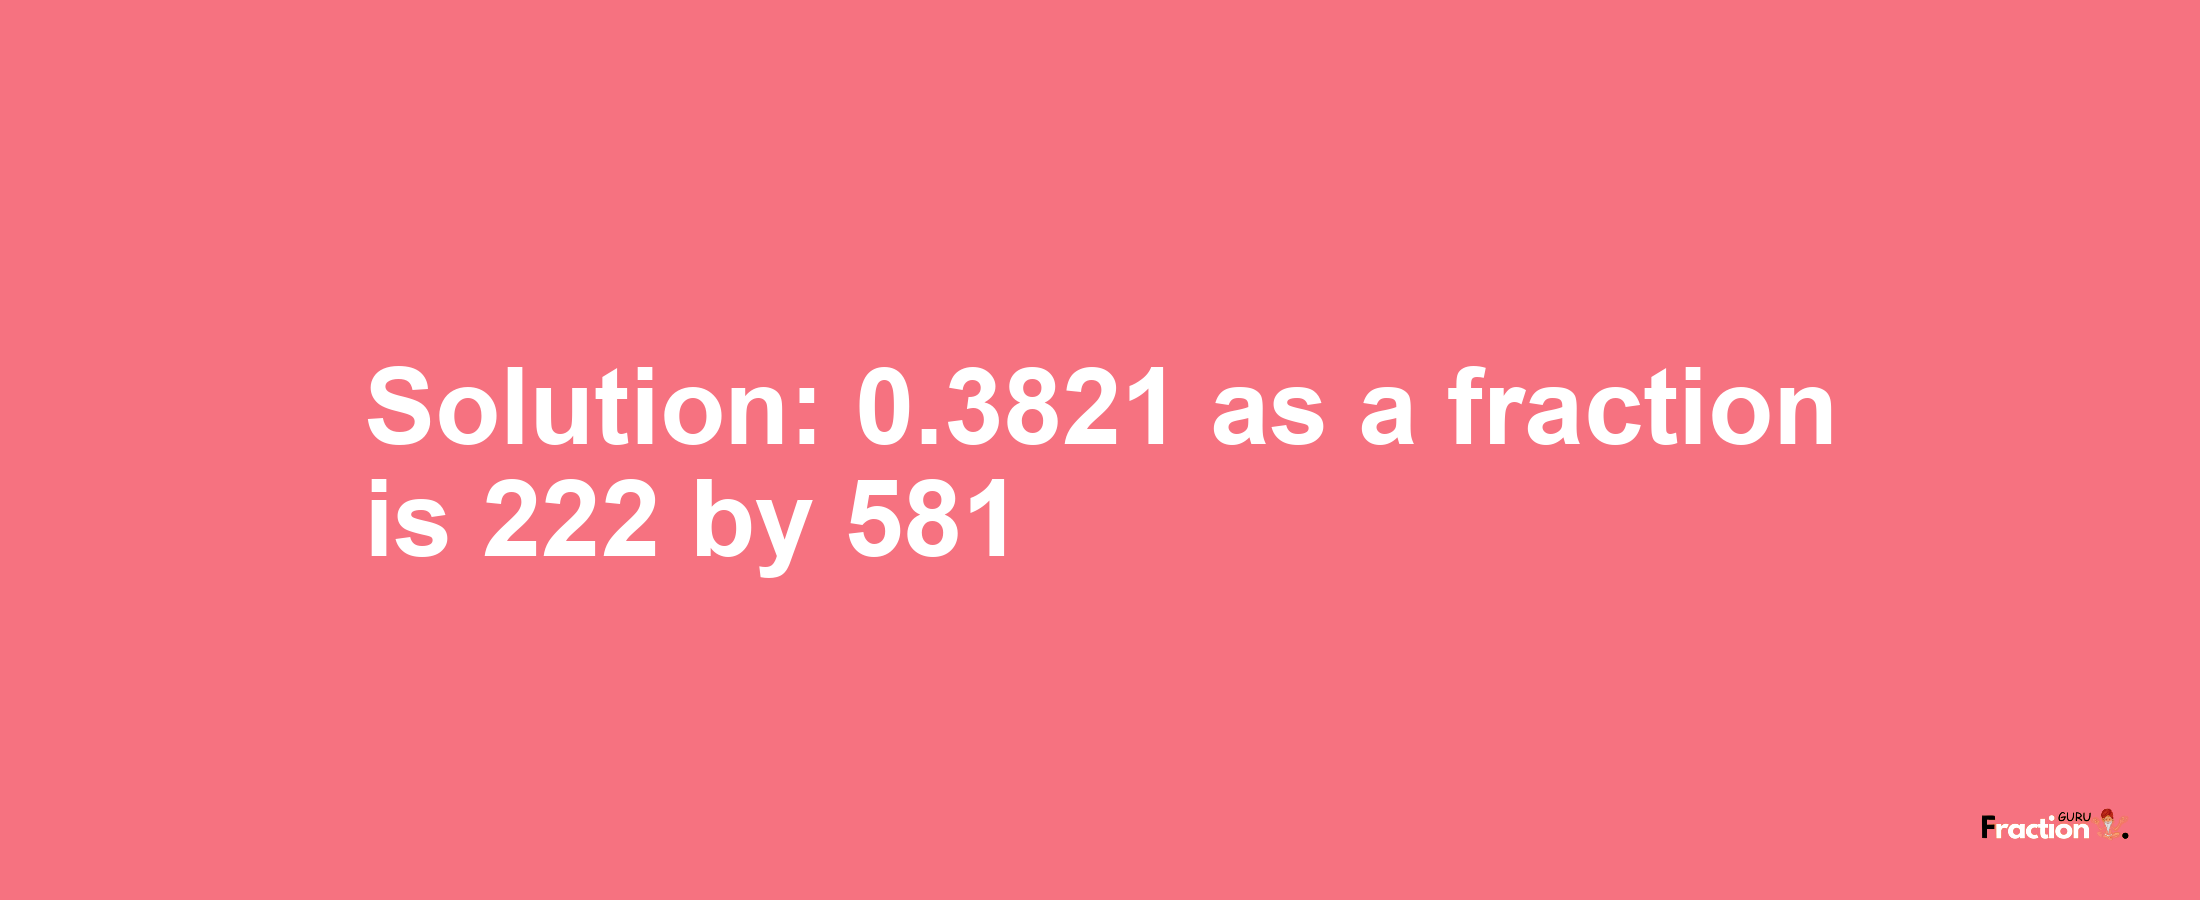 Solution:0.3821 as a fraction is 222/581